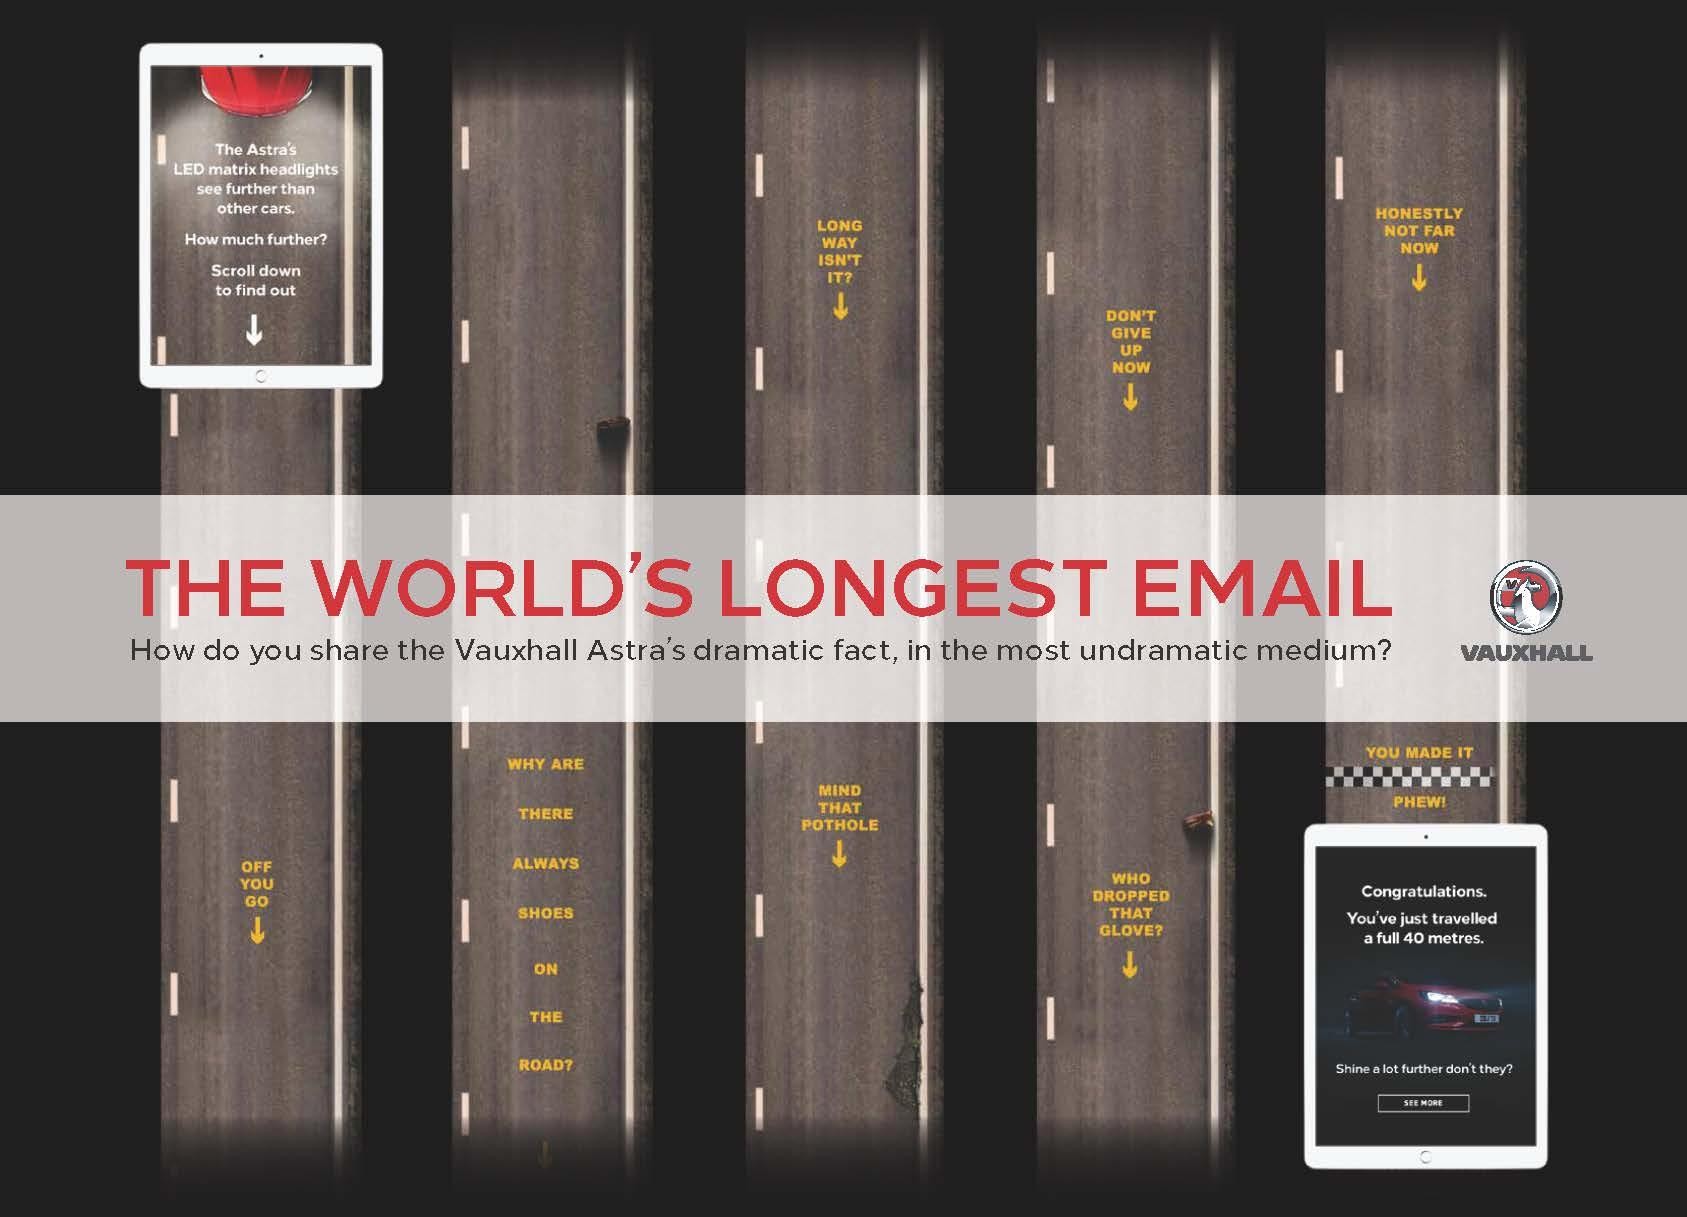 The world's longest email